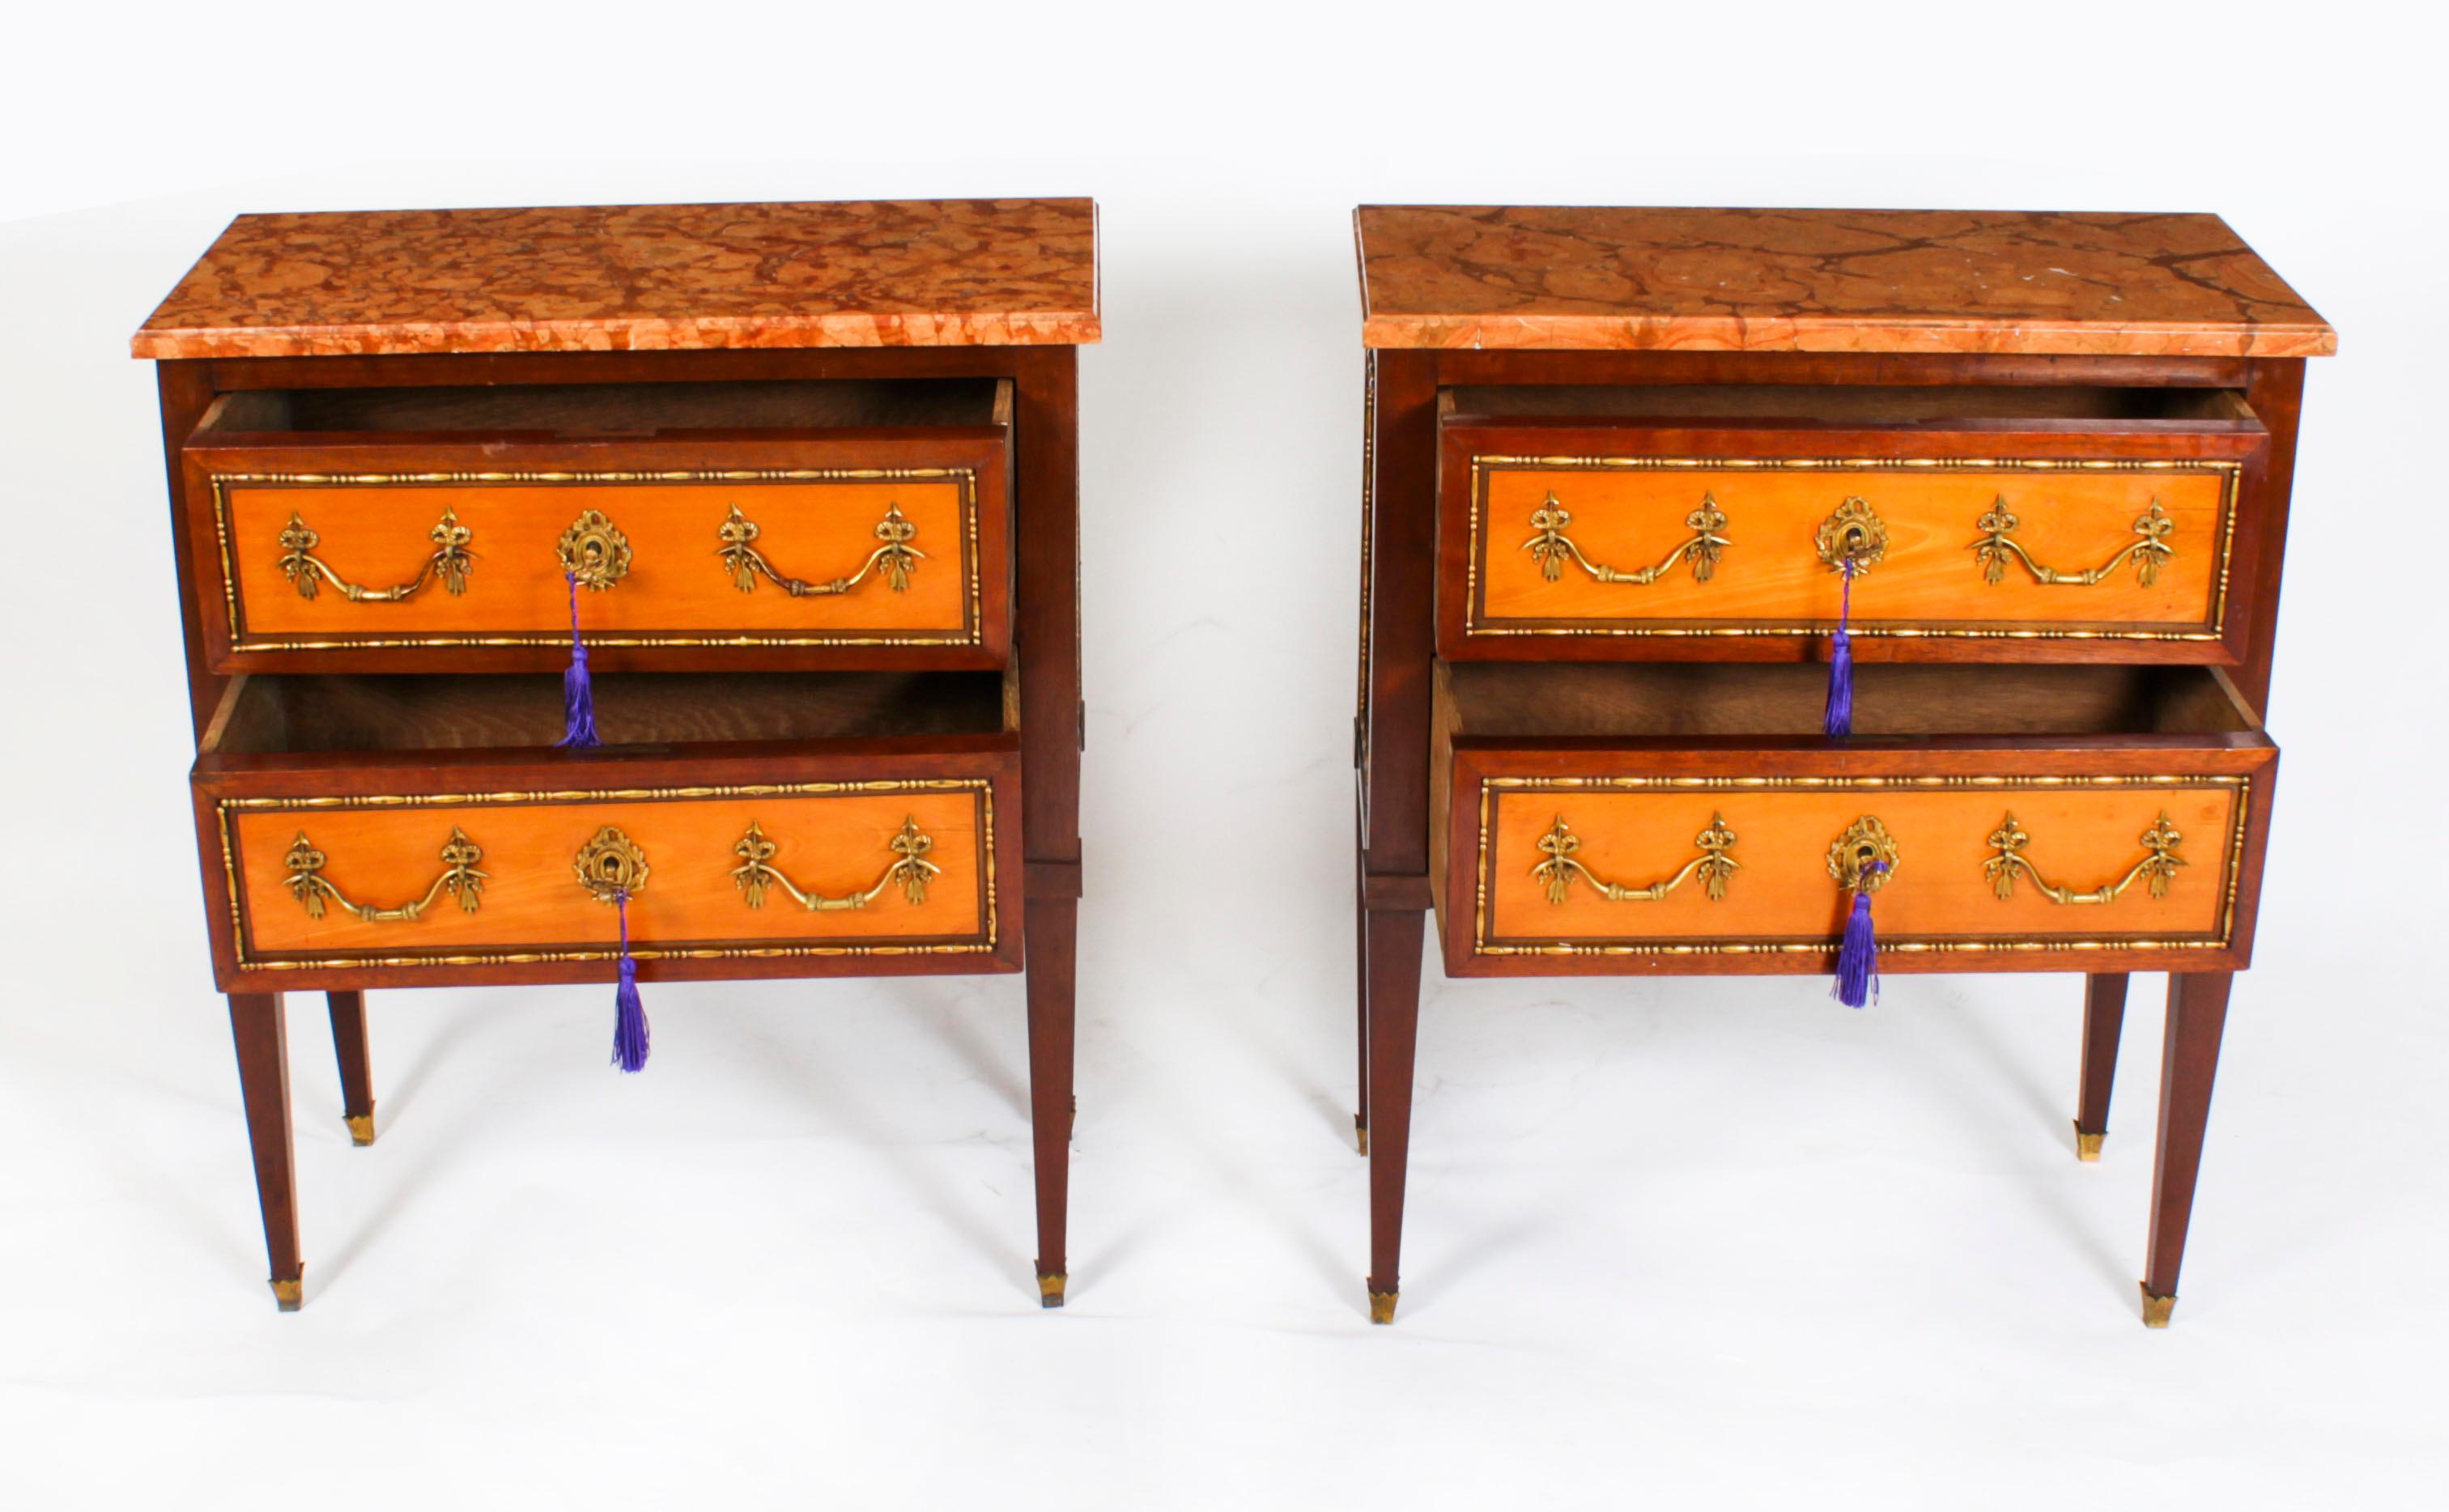 Ormolu Antique Pair Satinwood Bedside Commodes Cabinets Chests 19th C